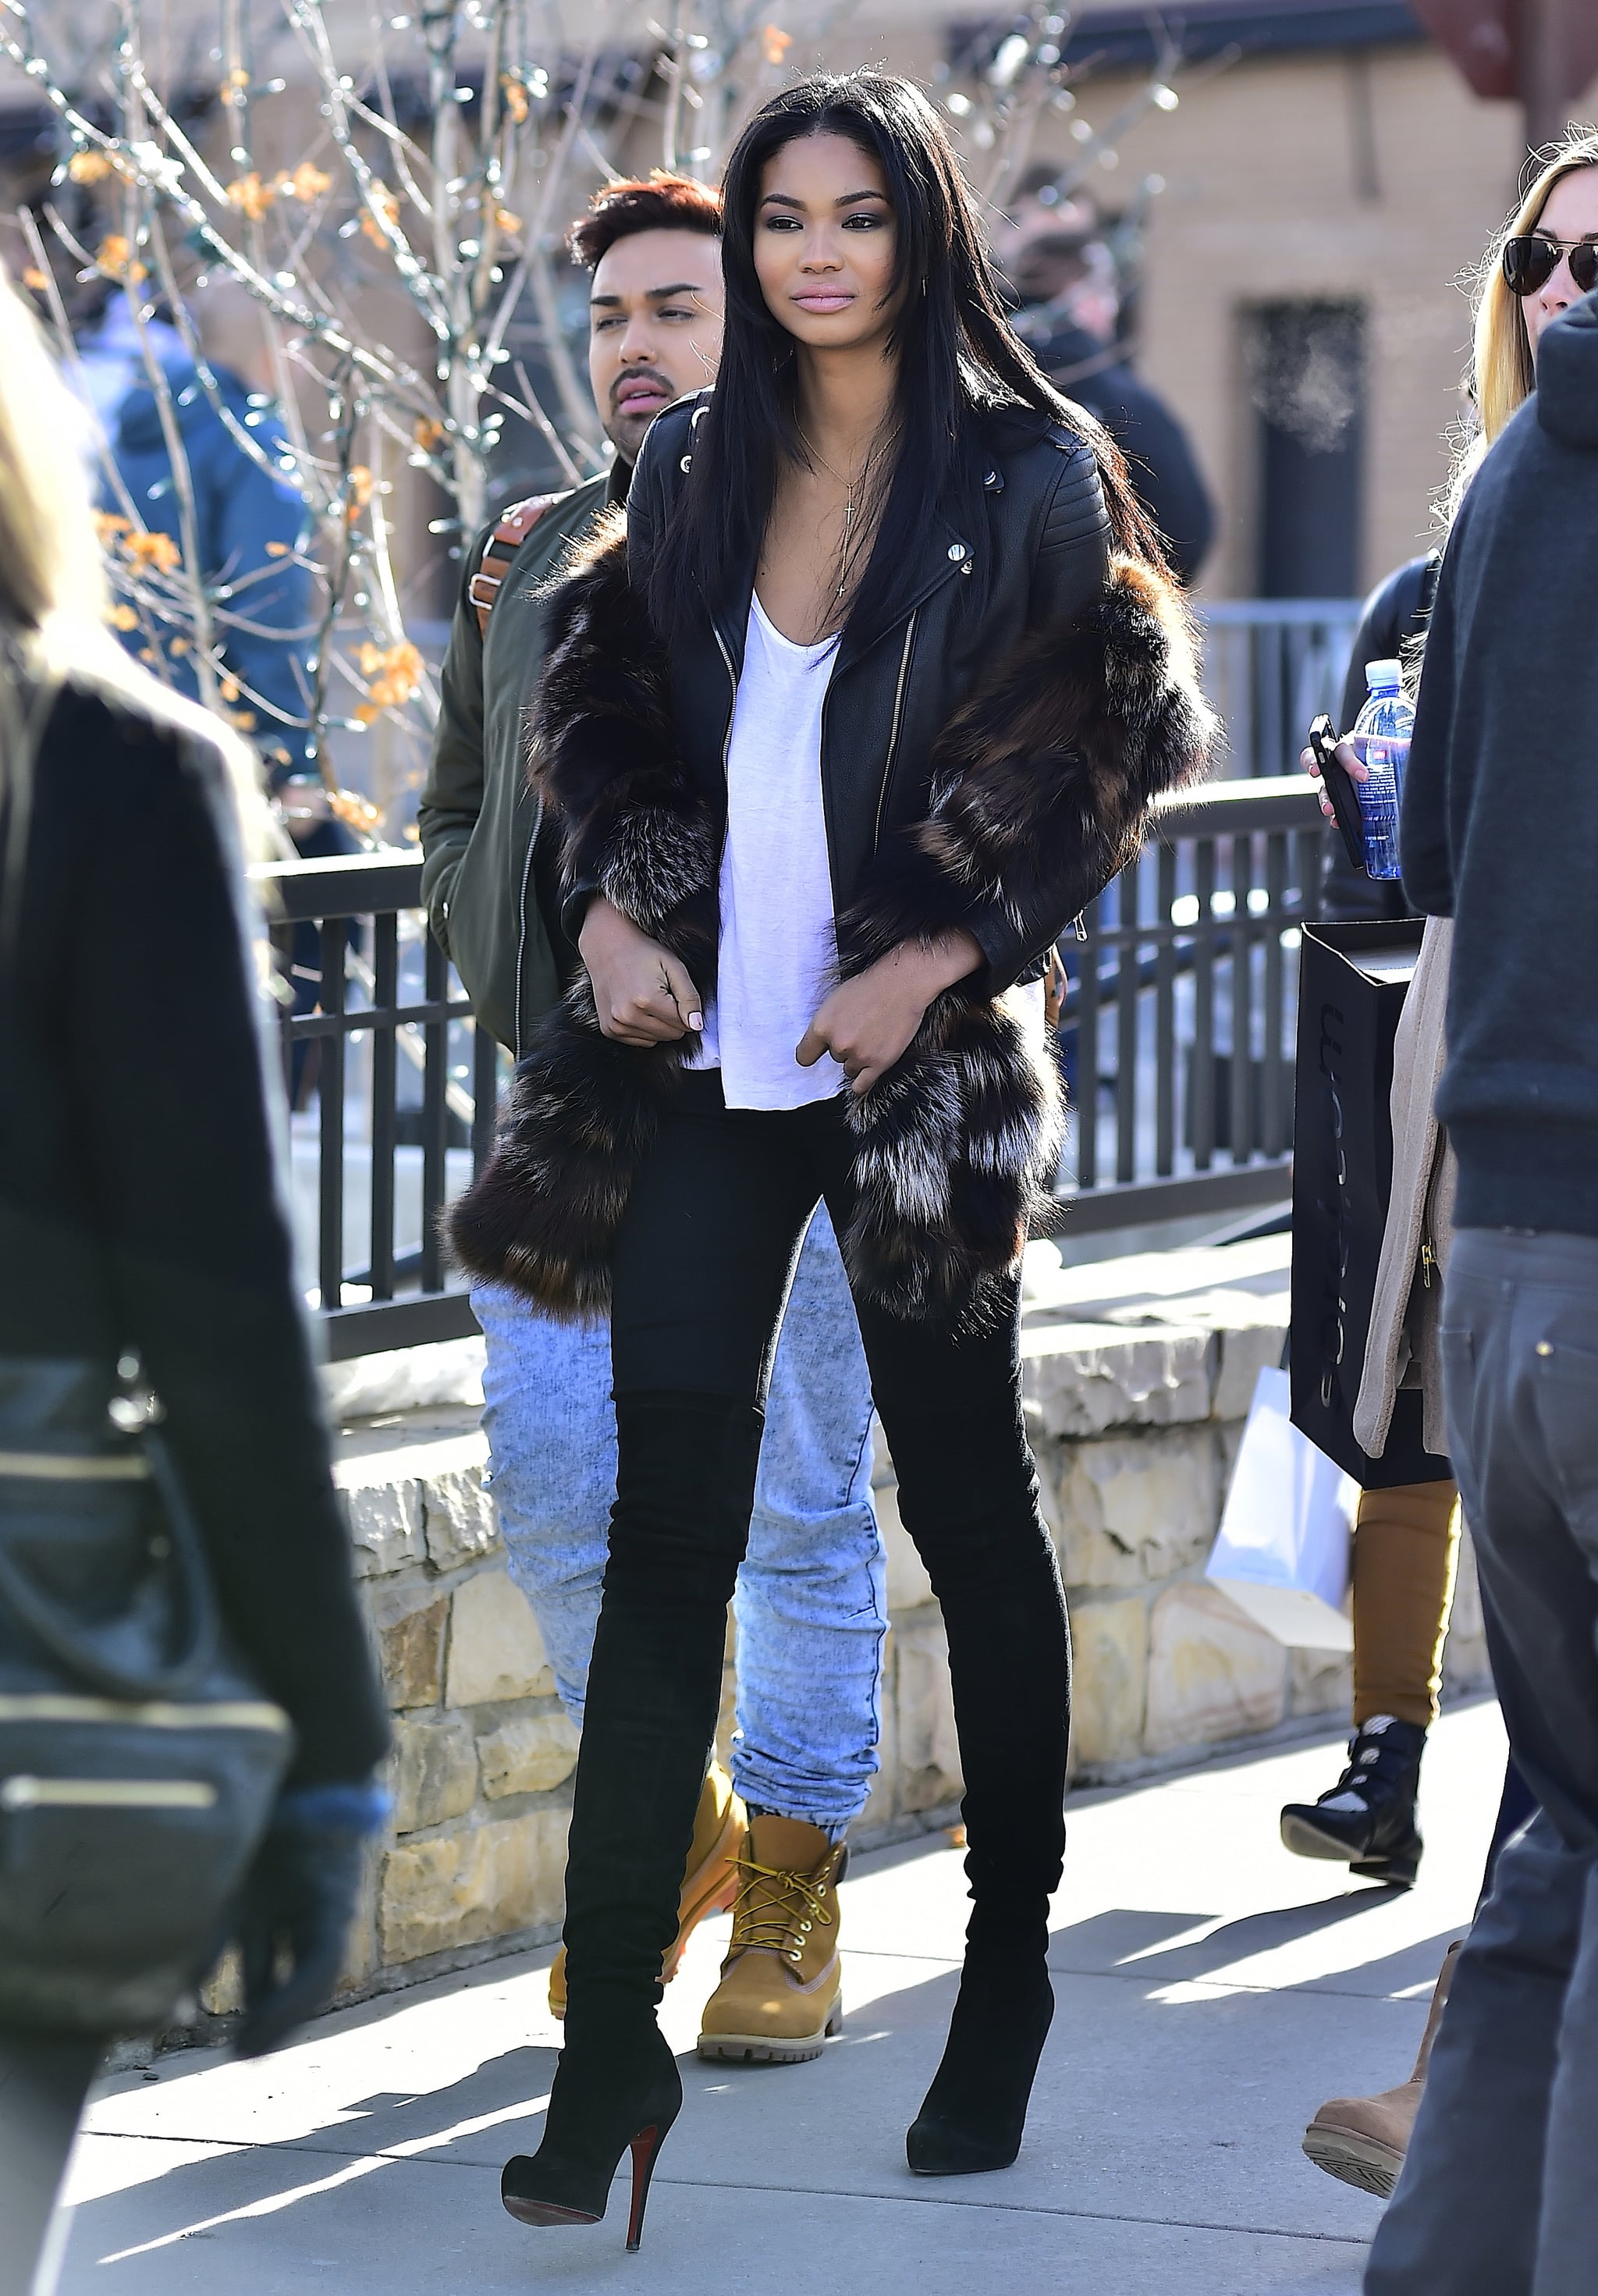 Chanel Iman wore a fur coat over her leather jacket and stayed cool |  Styling Hacks to Steal From the Best Model Off-Duty Moments | POPSUGAR  Fashion Photo 27